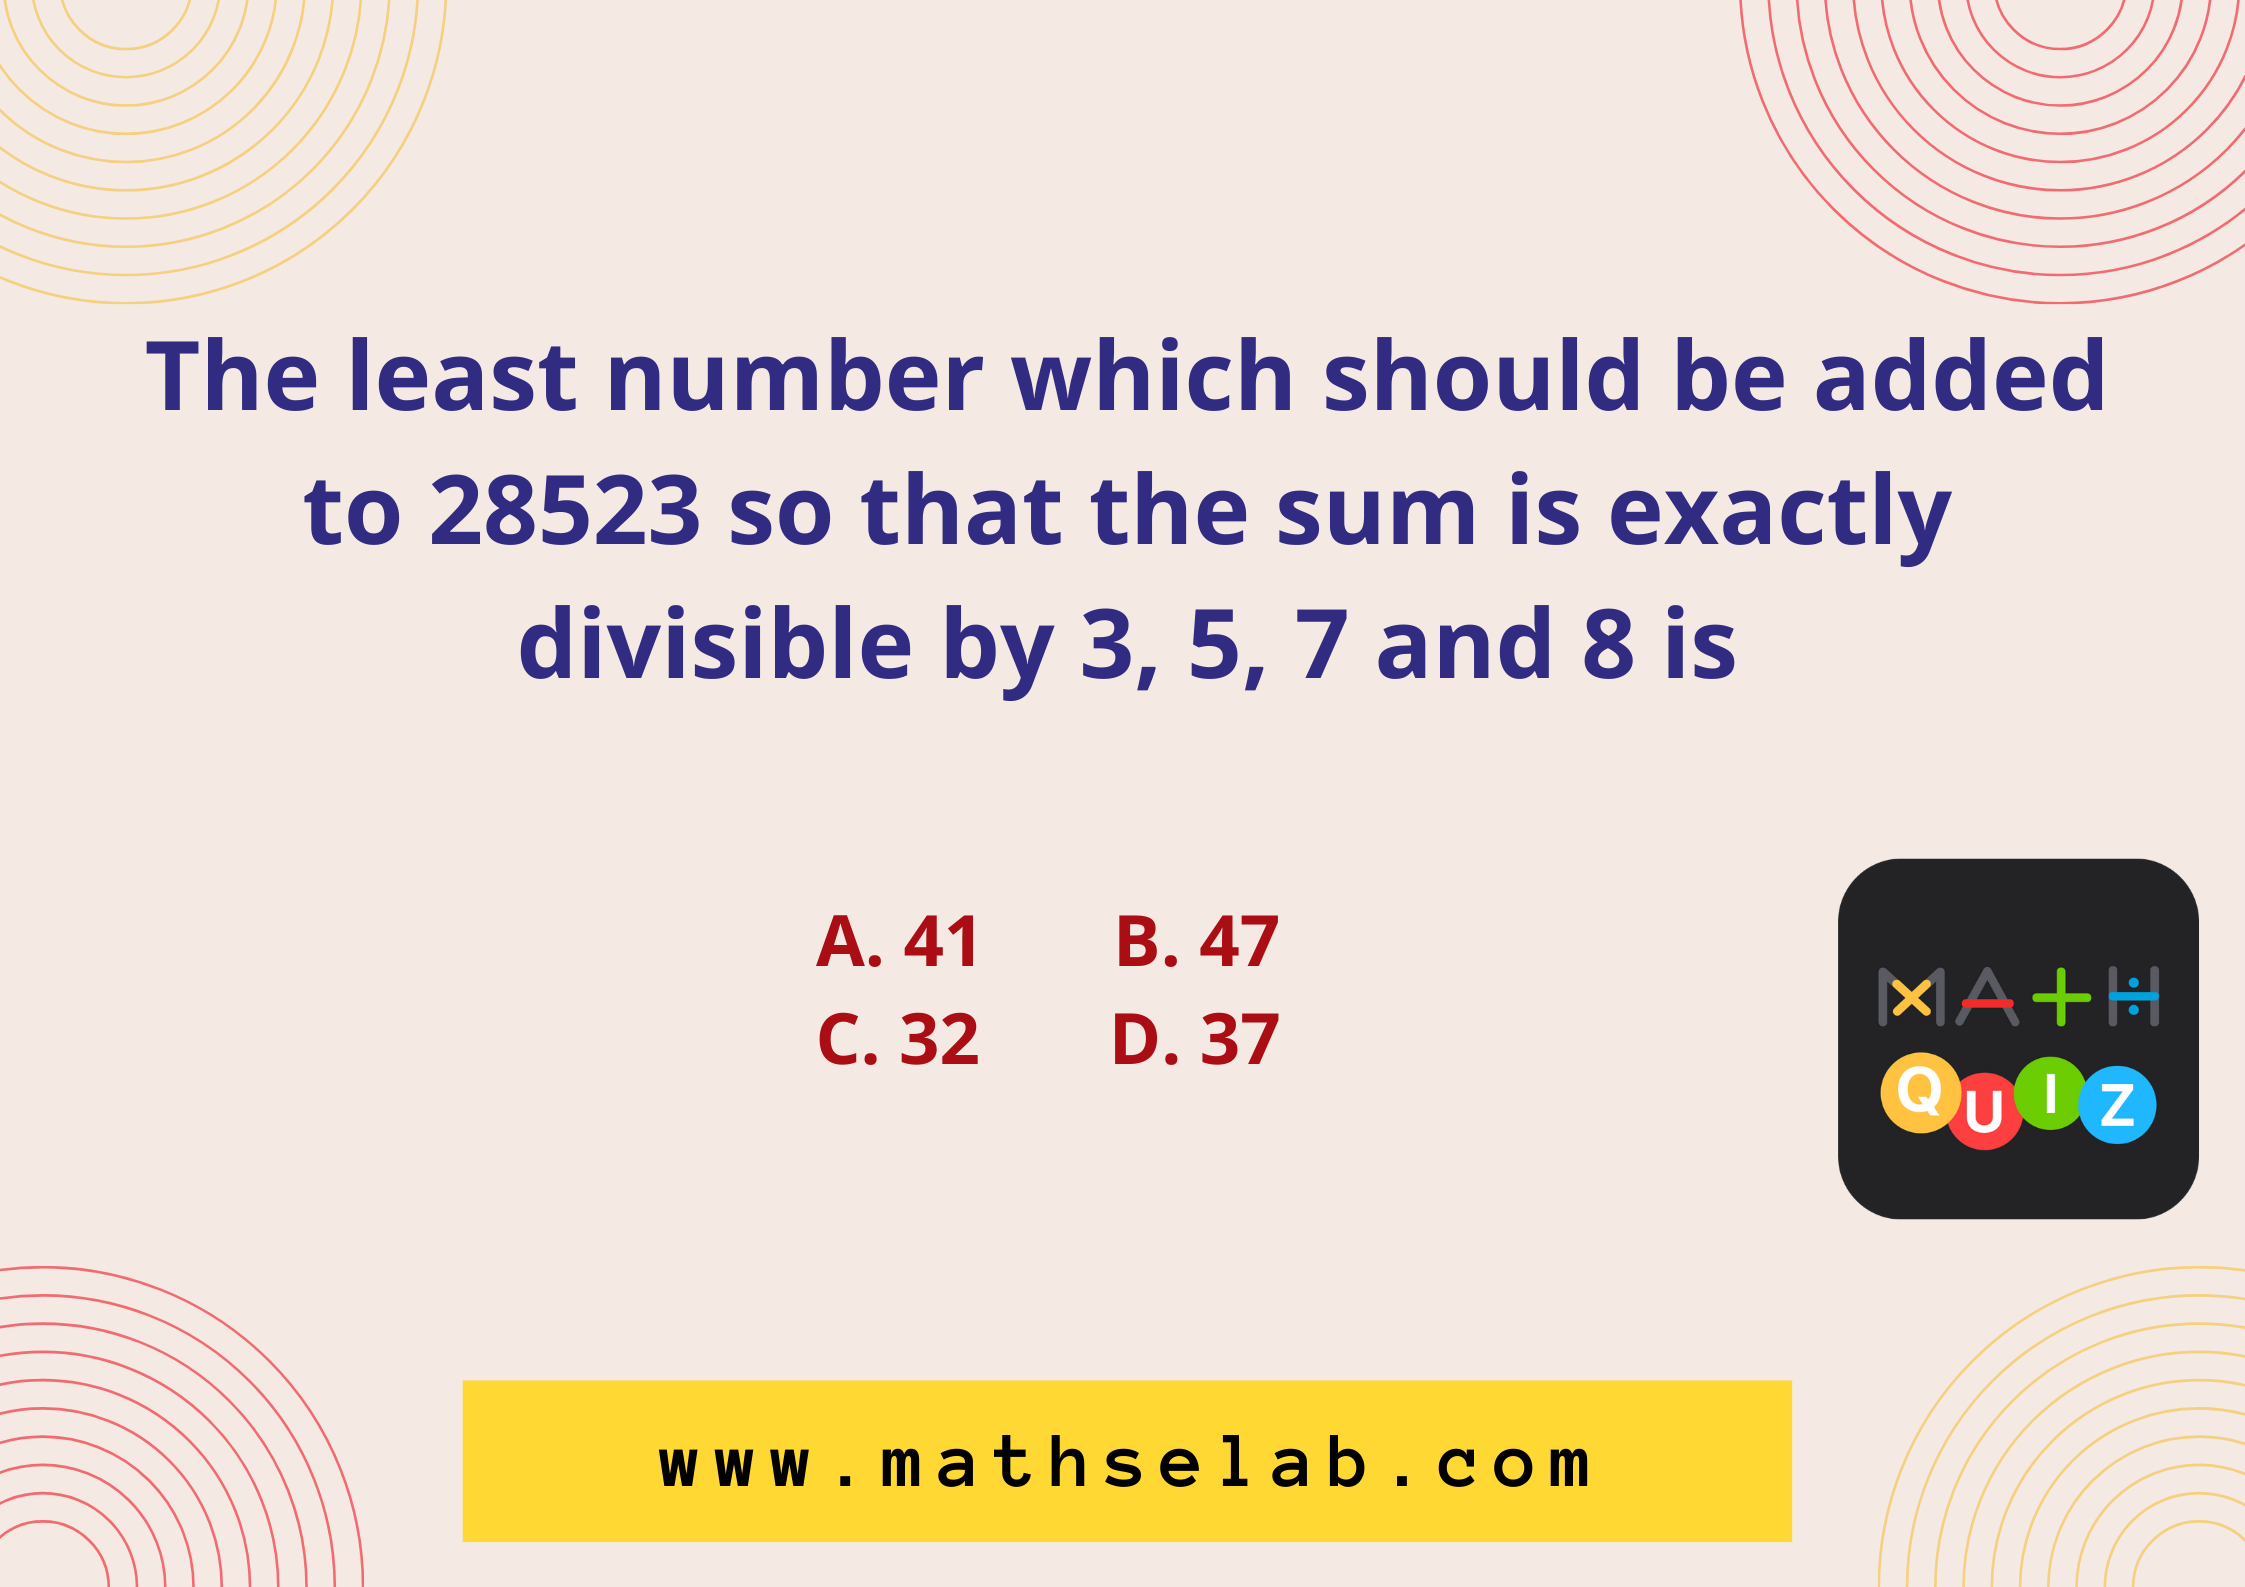 The least number which should be added to 28523 so that the sum is exactly divisible by 3, 5, 7 and 8 is